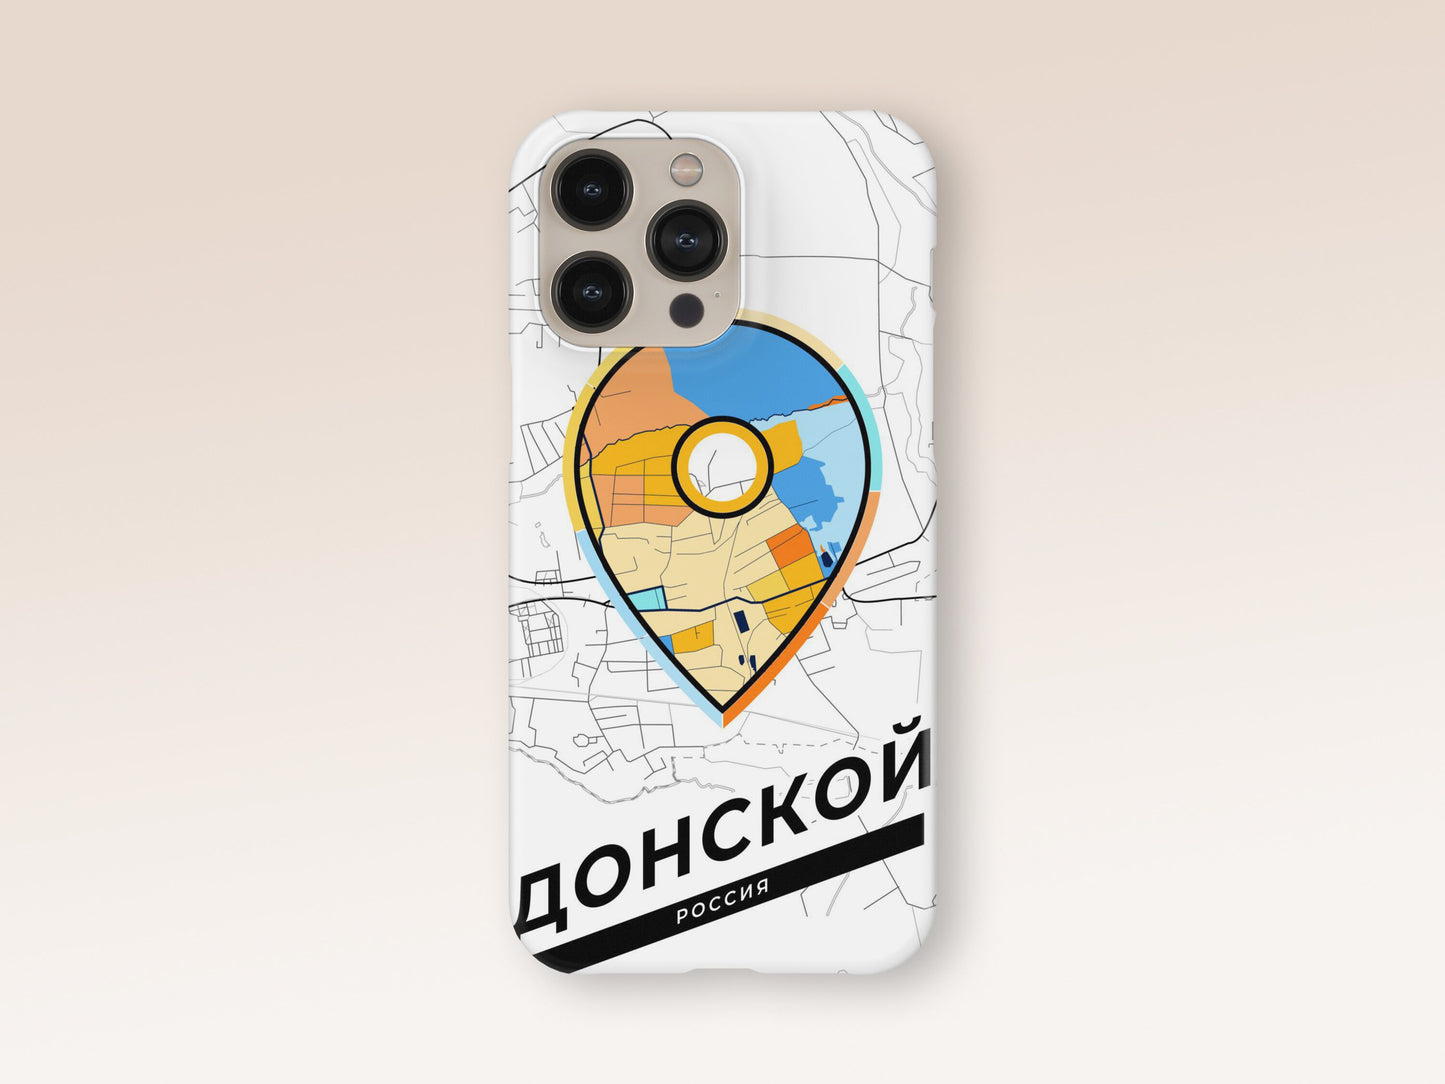 Donskoy Russia slim phone case with colorful icon. Birthday, wedding or housewarming gift. Couple match cases. 1